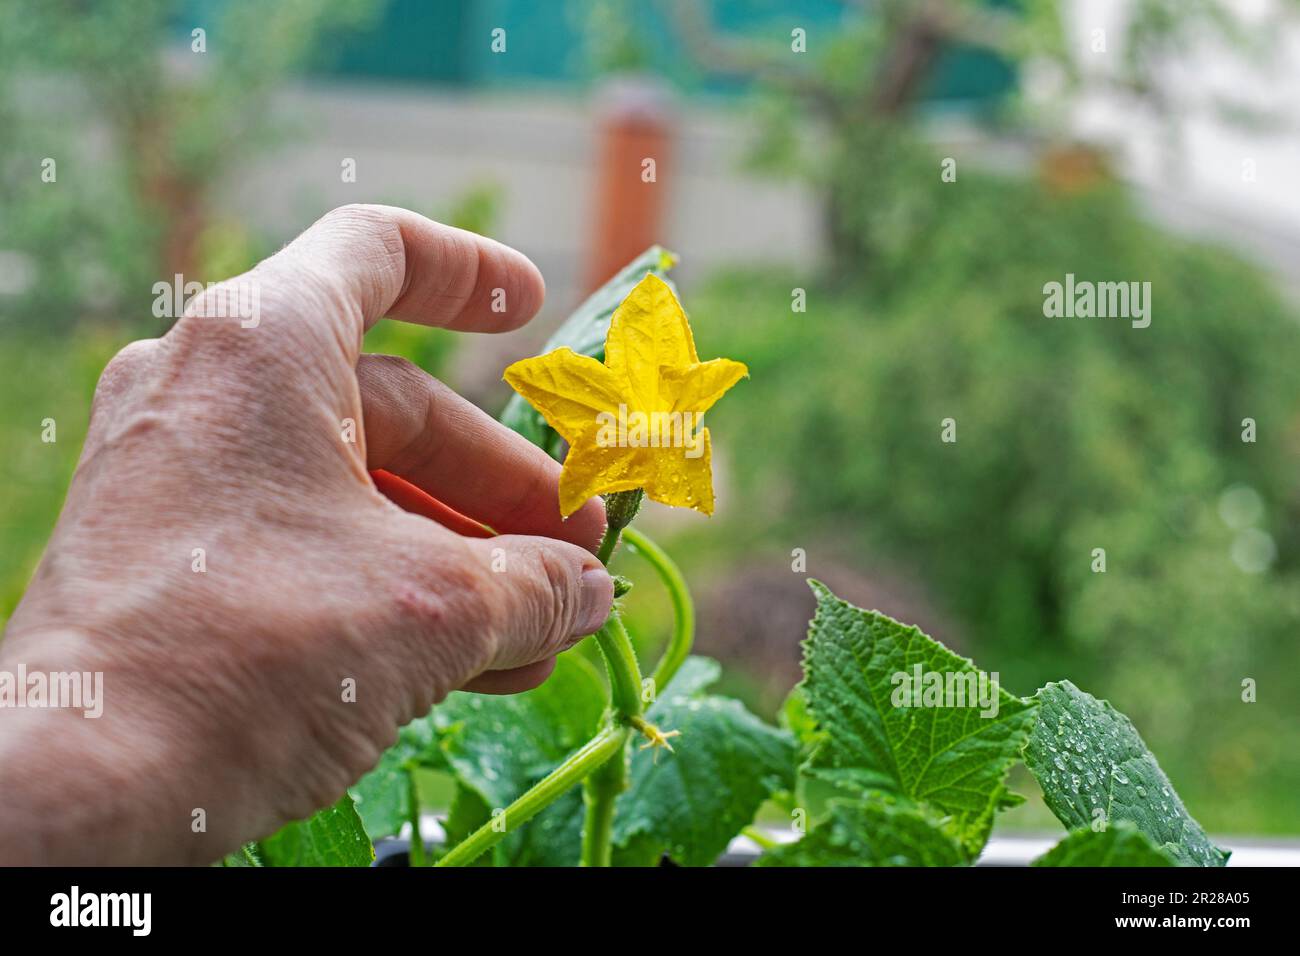 yellow cucumber flower after cucumber ovary, growing cucumbers at home. farming Stock Photo